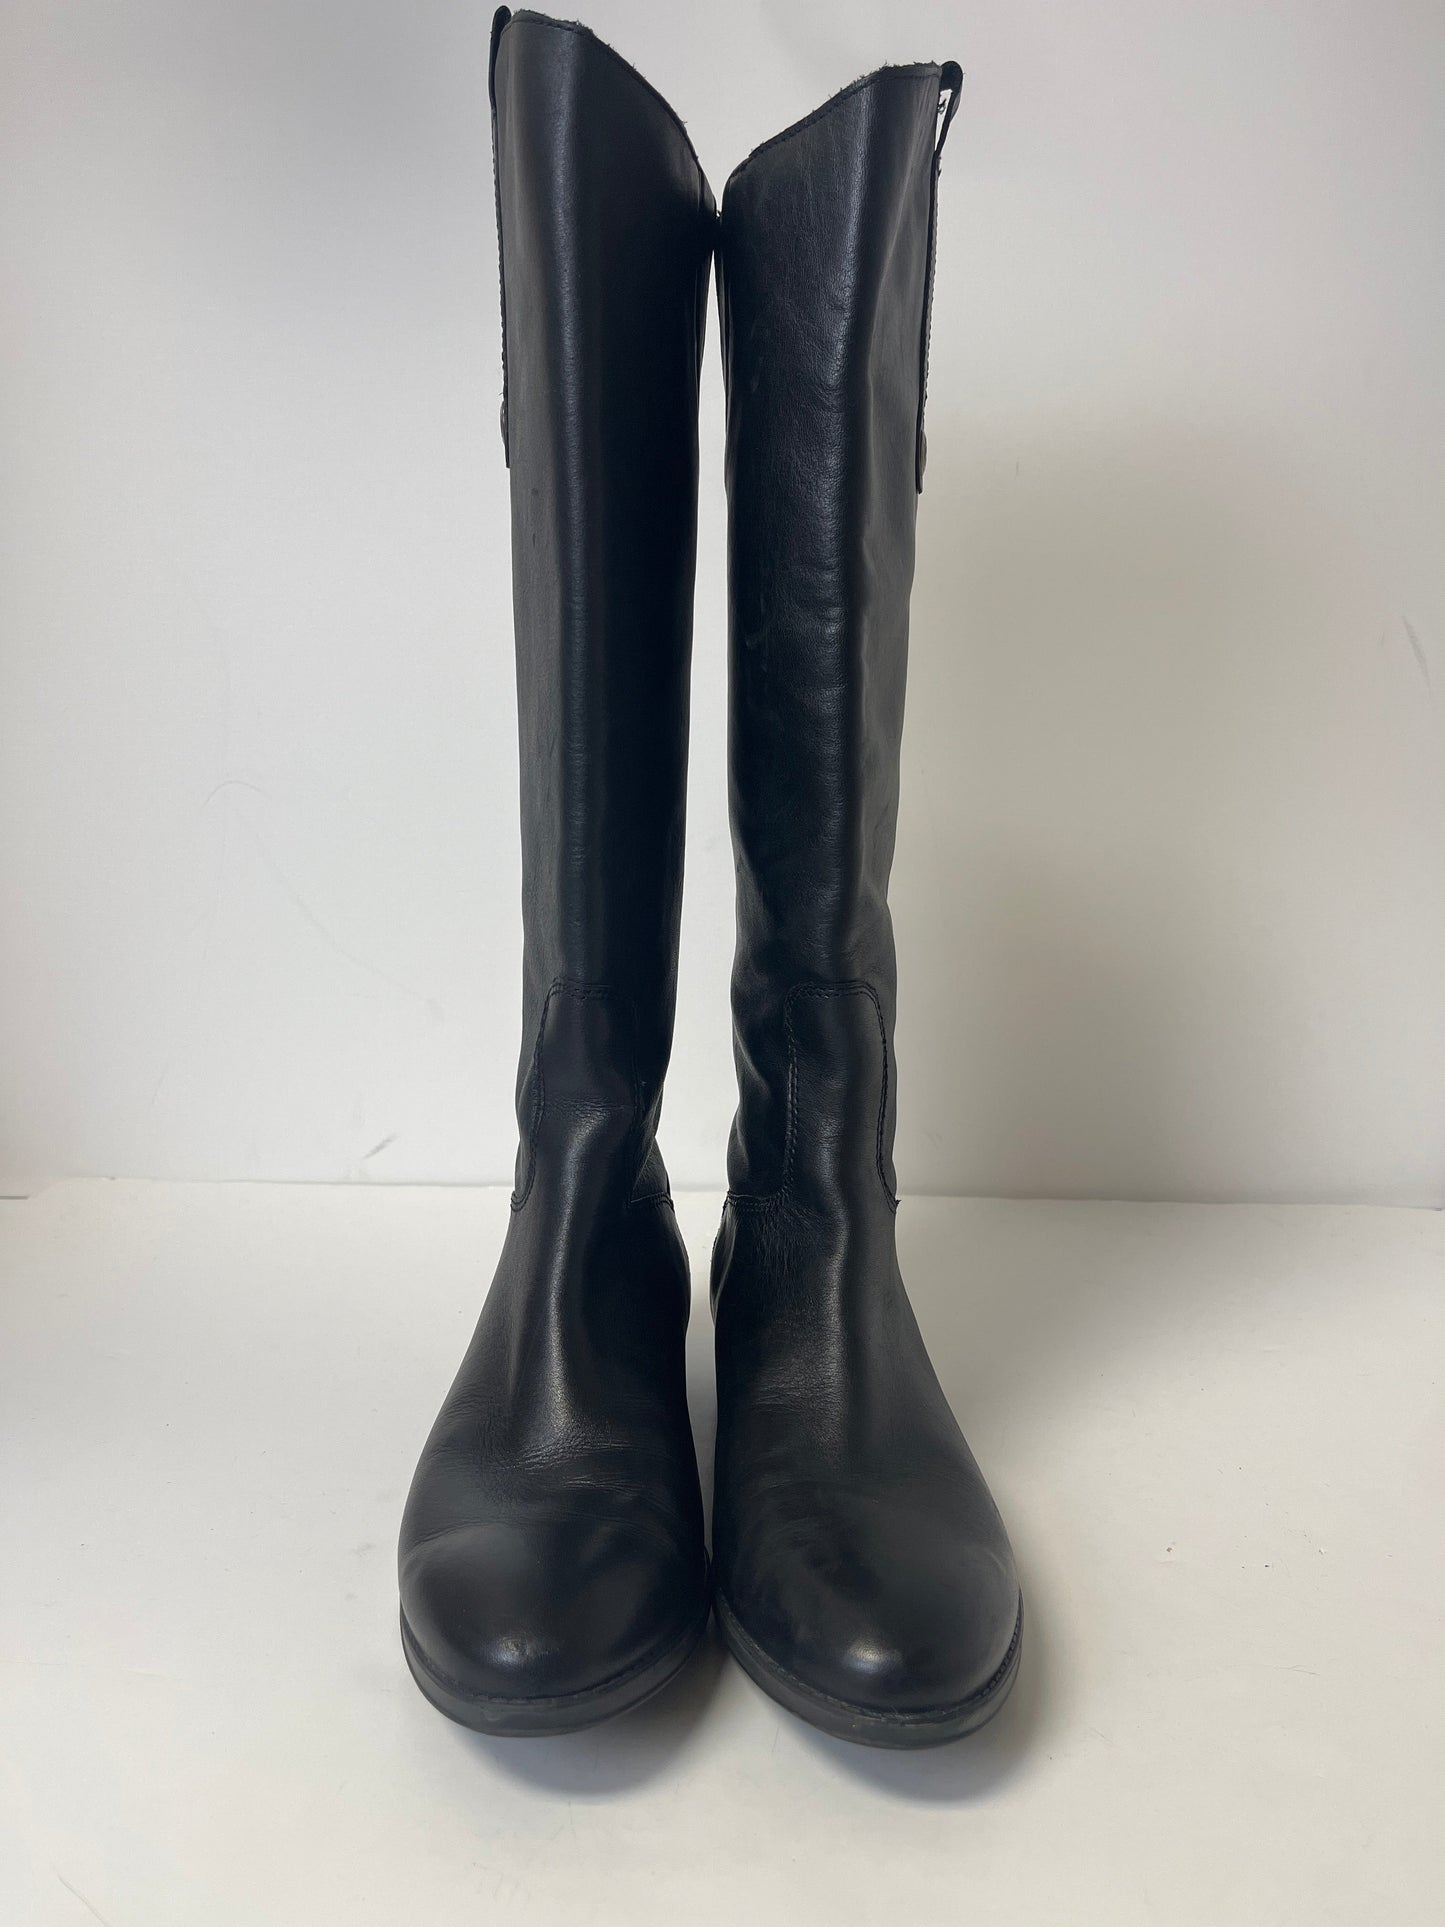 Boots Knee Flats By Sam Edelman  Size: 8